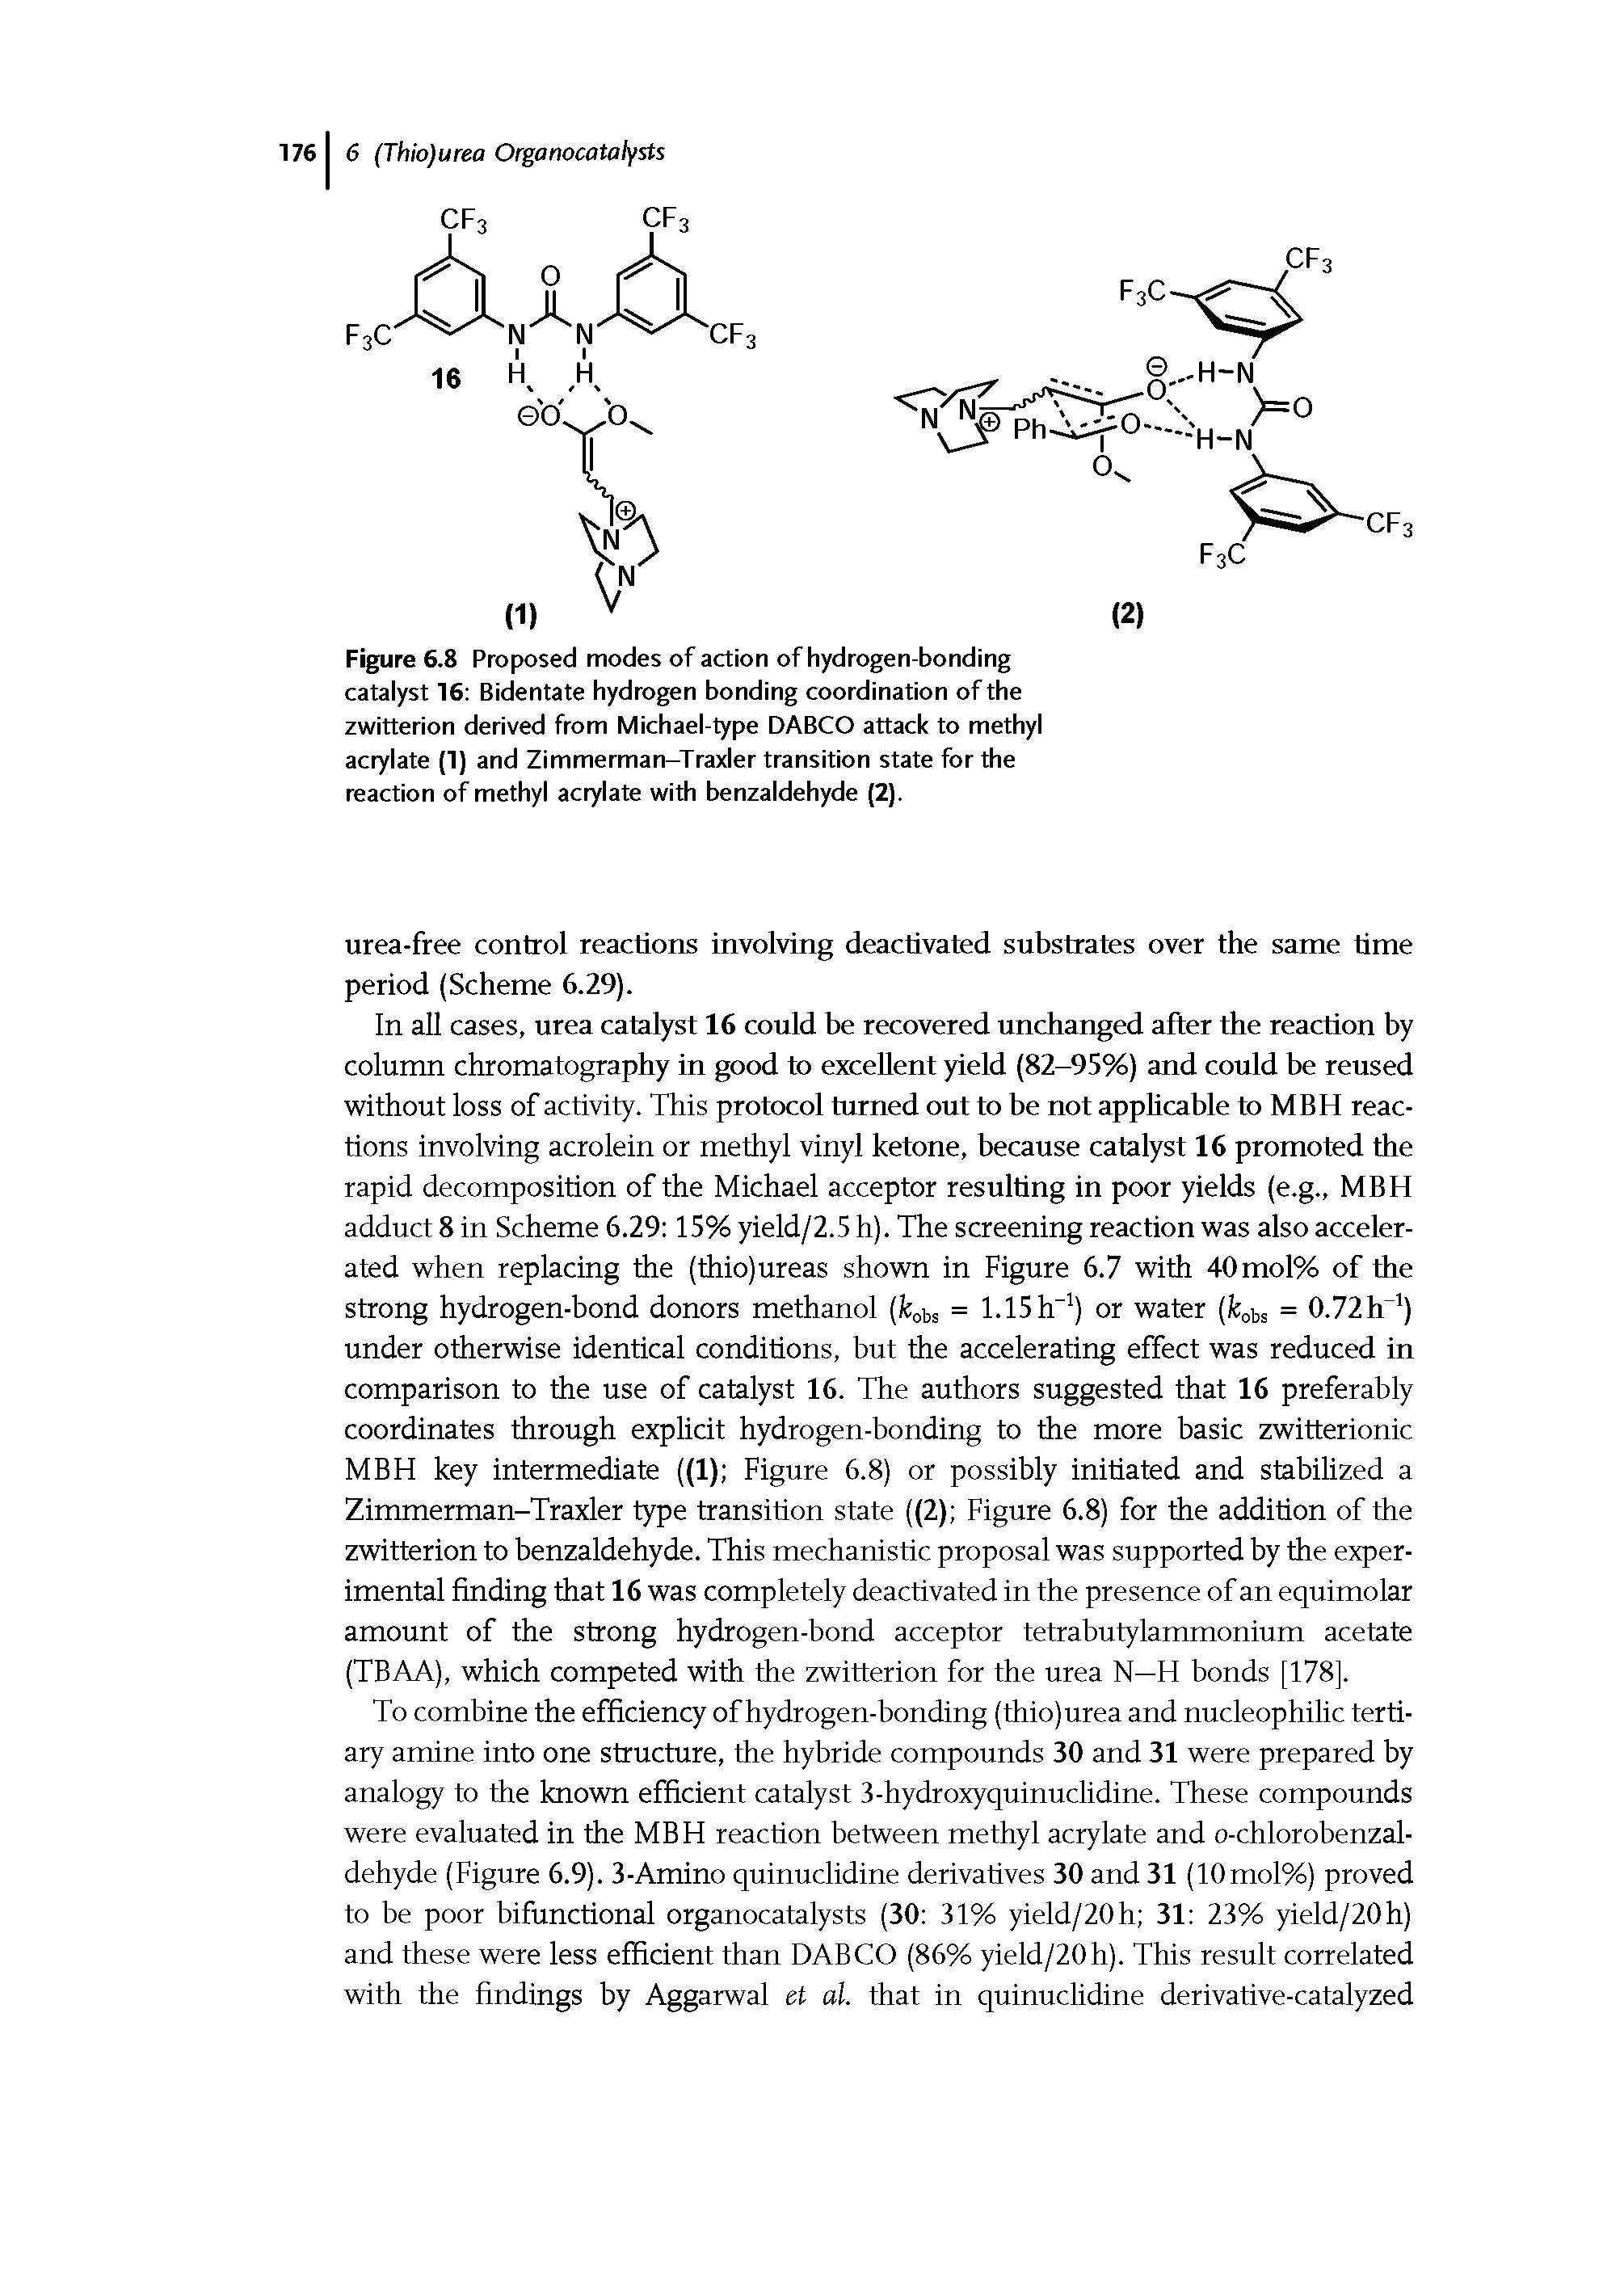 Figure 6.8 Proposed modes of action of hydrogen-bonding catalyst 16 Bidentate hydrogen bonding coordination of the zwitterion derived from Michael-type DABCO attack to methyl acrylate (1) and Zimmerman-Traxler transition state for the reaction of methyl acrylate with benzaldehyde (2).